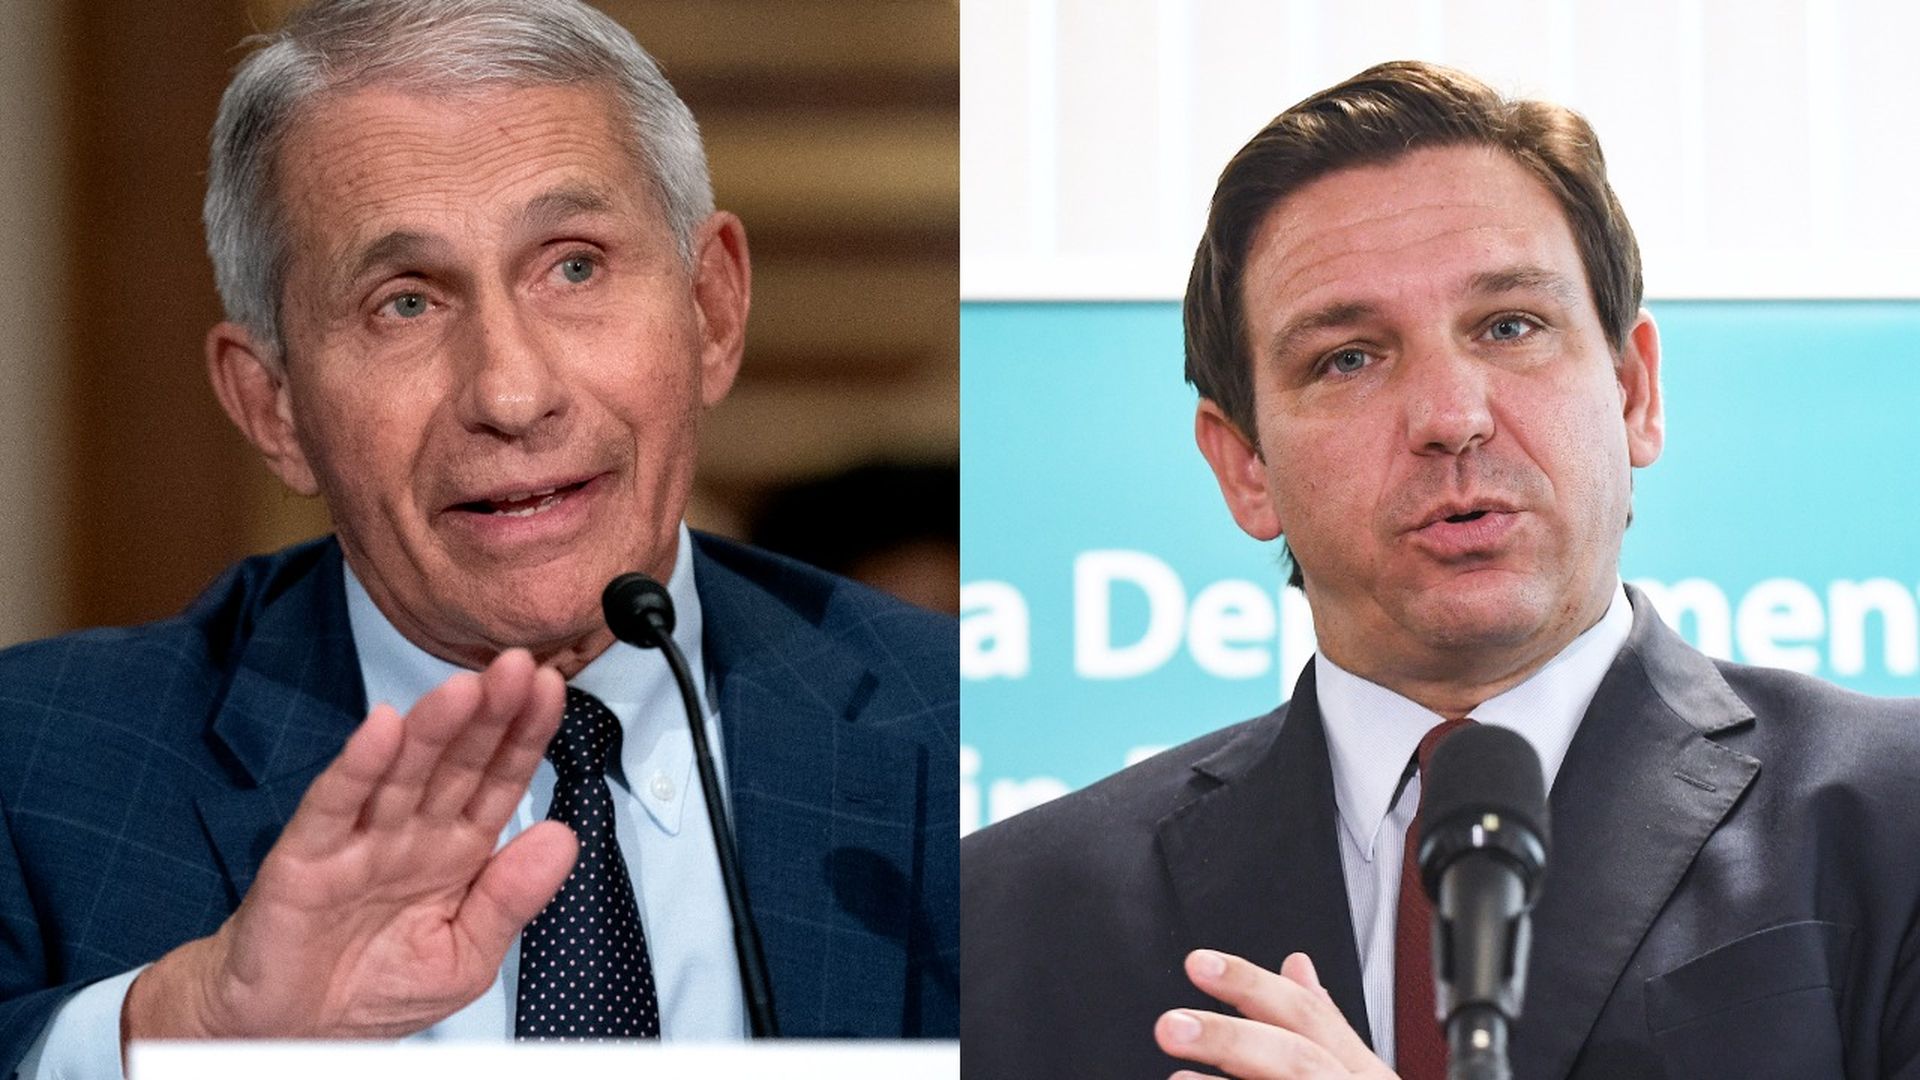 Photo of Anthony Fauci speaking on the left and Ron DeSantis speaking on the right